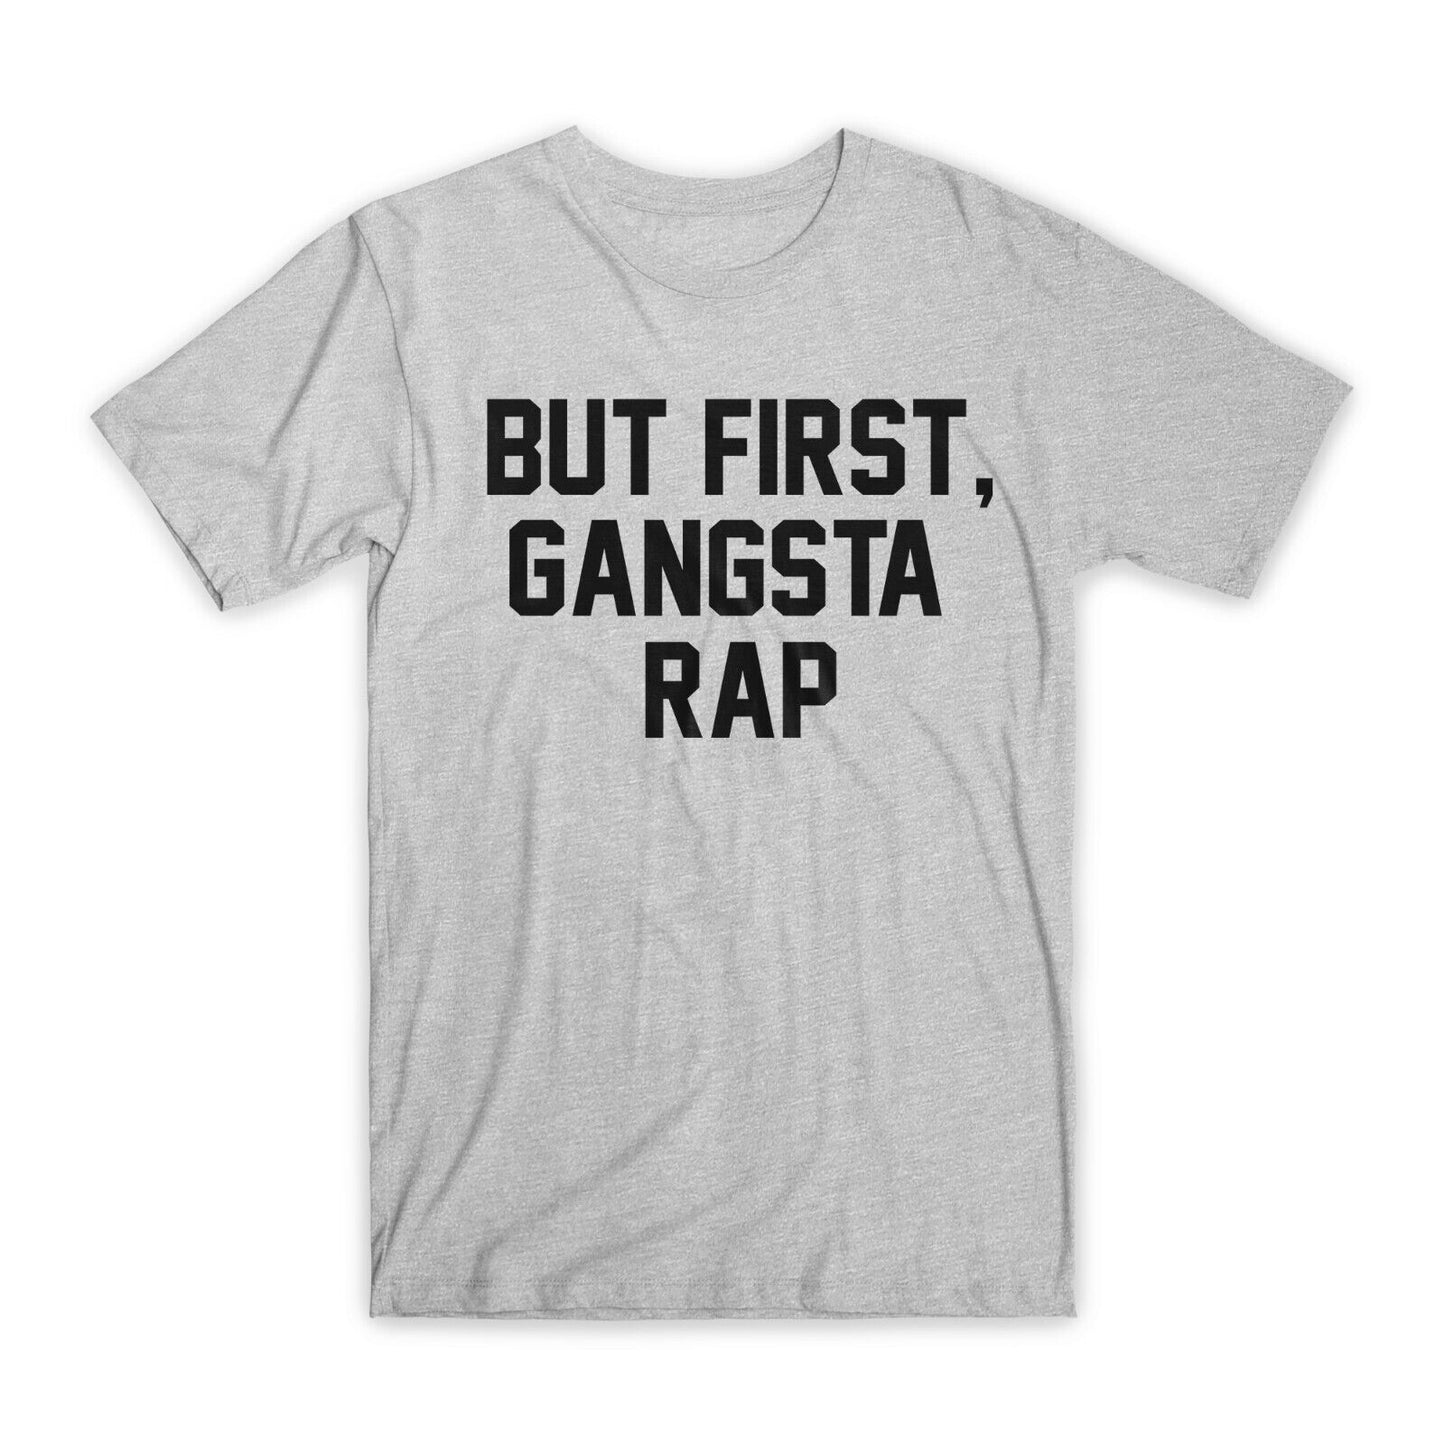 But First, Gangsta Rap T-Shirt Premium Soft Cotton Crew Neck Funny Tee Gifts NEW